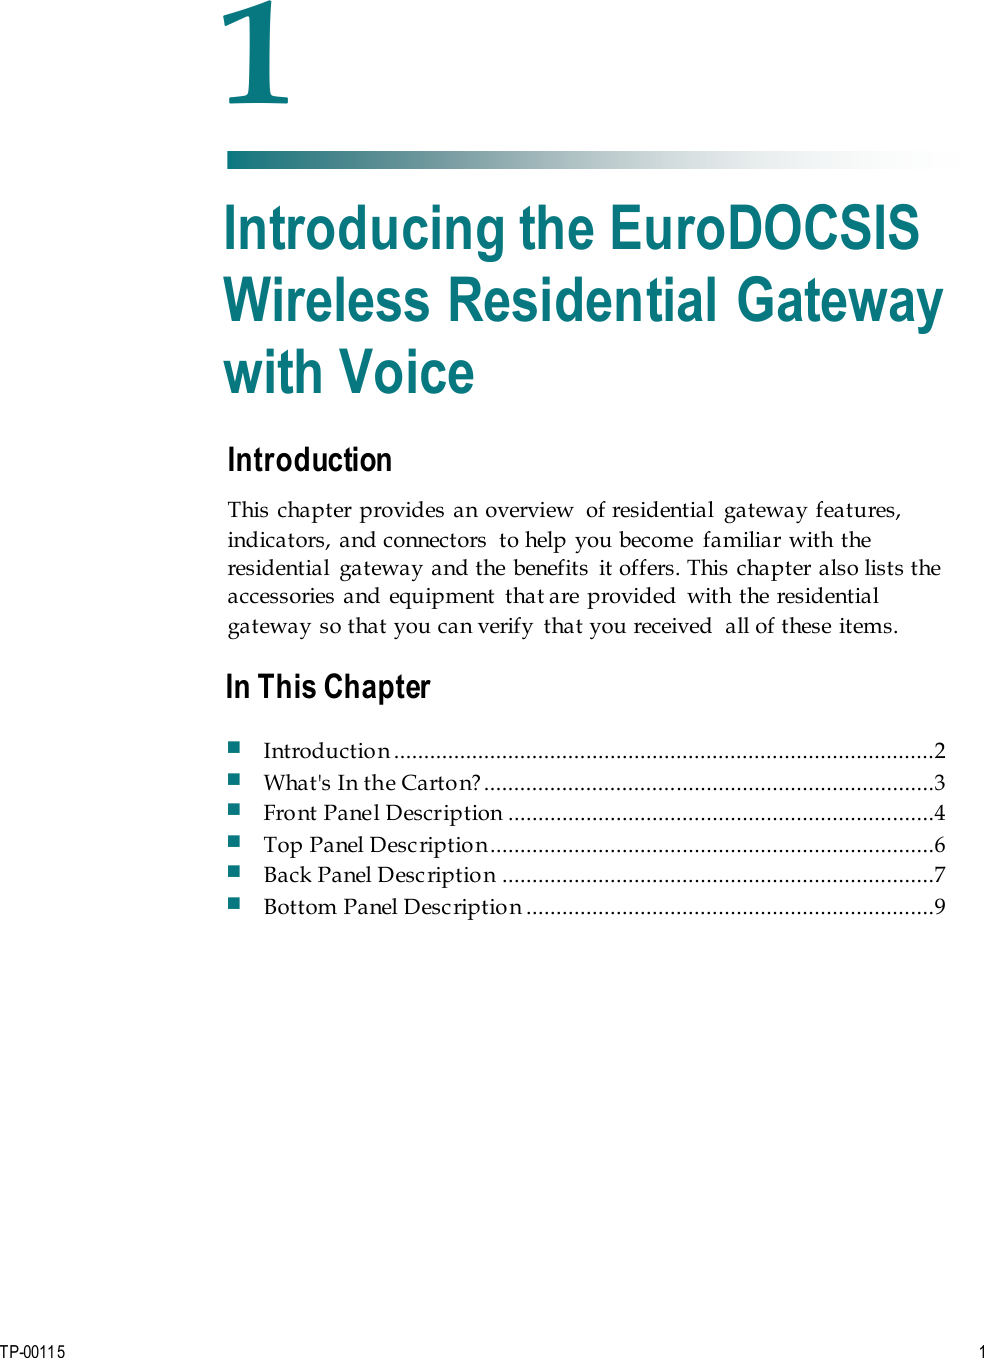 TP-00115   1 Introduction This chapter provides an overview  of residential  gateway features, indicators,  and connectors  to help  you become  familiar with the residential  gateway and the benefits  it offers. This chapter also lists the accessories and equipment  that are provided  with the residential gateway so that you can verify  that you received  all of these items. 1 Chapter 1 Introducing the EuroDOCSIS Wireless Residential Gateway with Voice In This Chapter Introduction ..........................................................................................2 What&apos;s In the Carton?...........................................................................3 Front Panel Description .......................................................................4 Top Panel Description..........................................................................6 Back Panel Description ........................................................................7 Bottom Panel Description ....................................................................9 